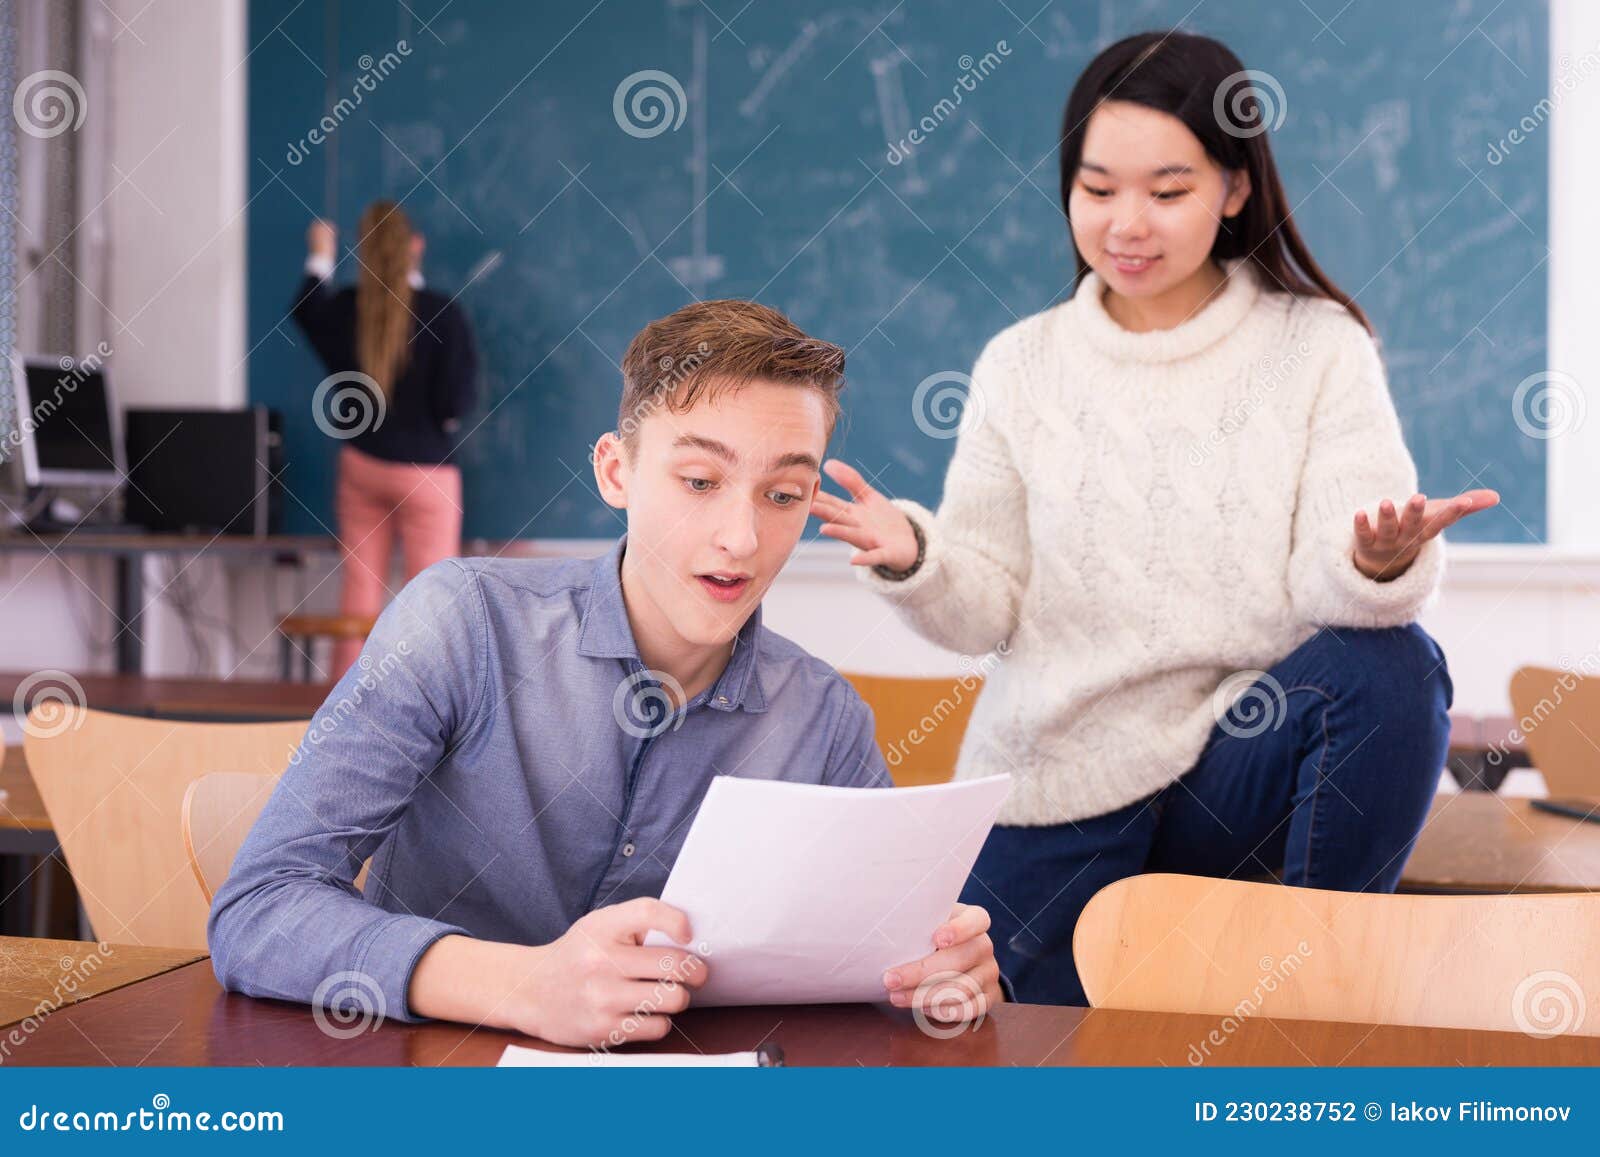 delighted teenager and chinese girl schoolmate reading notification